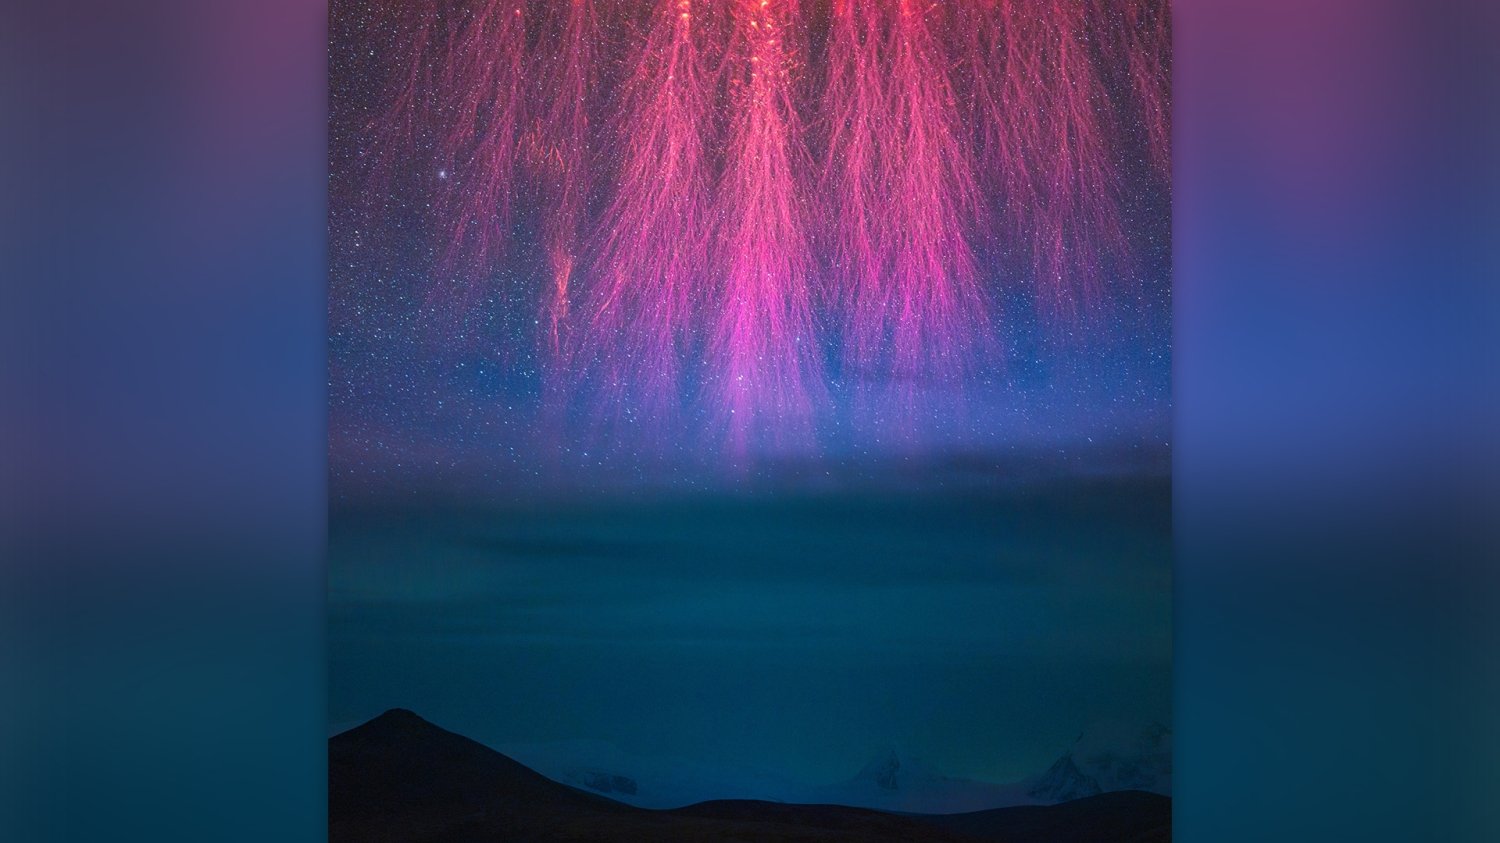 Top 5 winners of the 2023 astronomy photo of the year contest